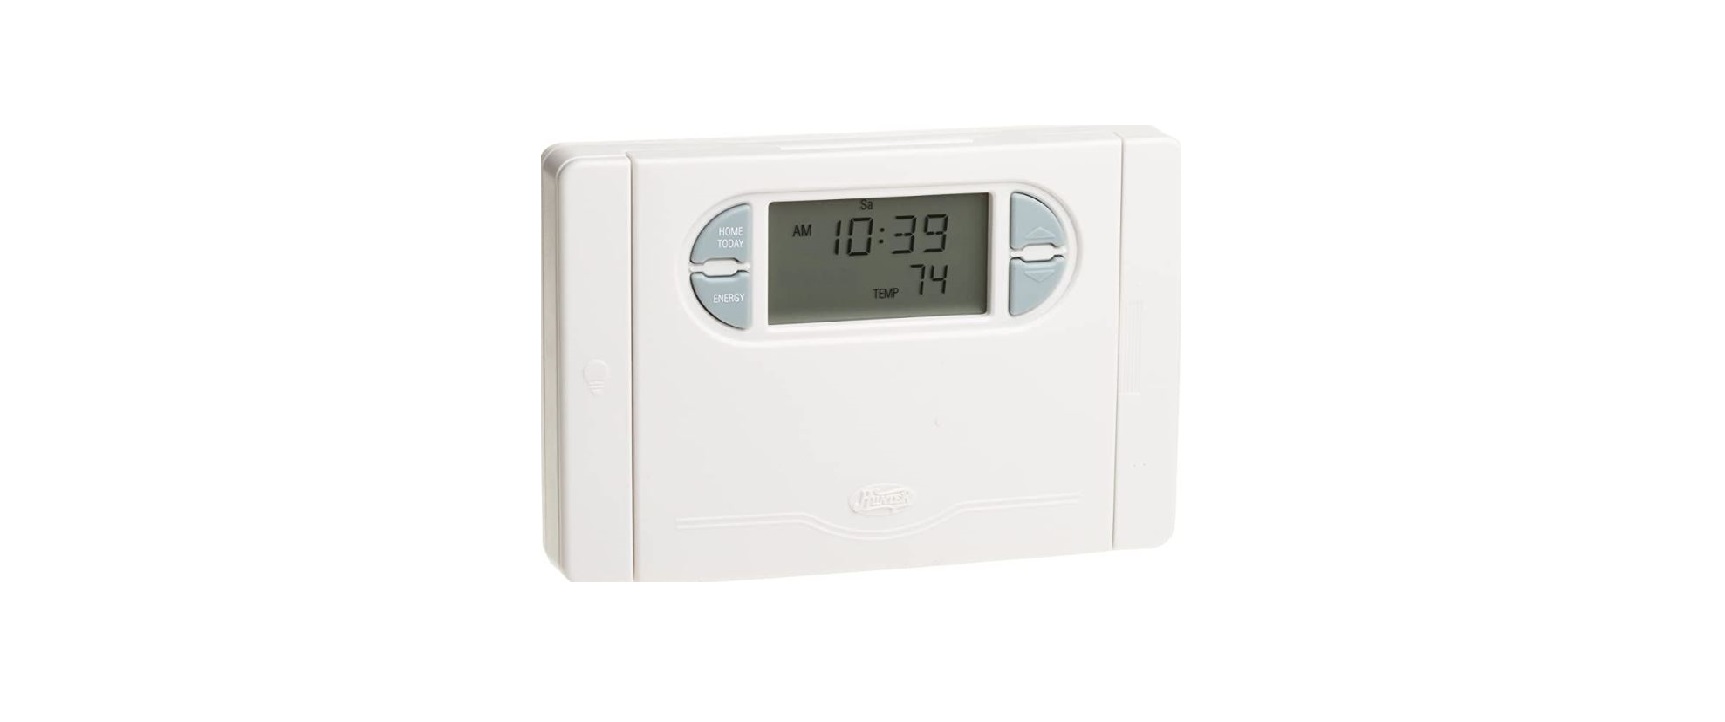 Hunter 44550 Programmable Thermostat Owners Manual